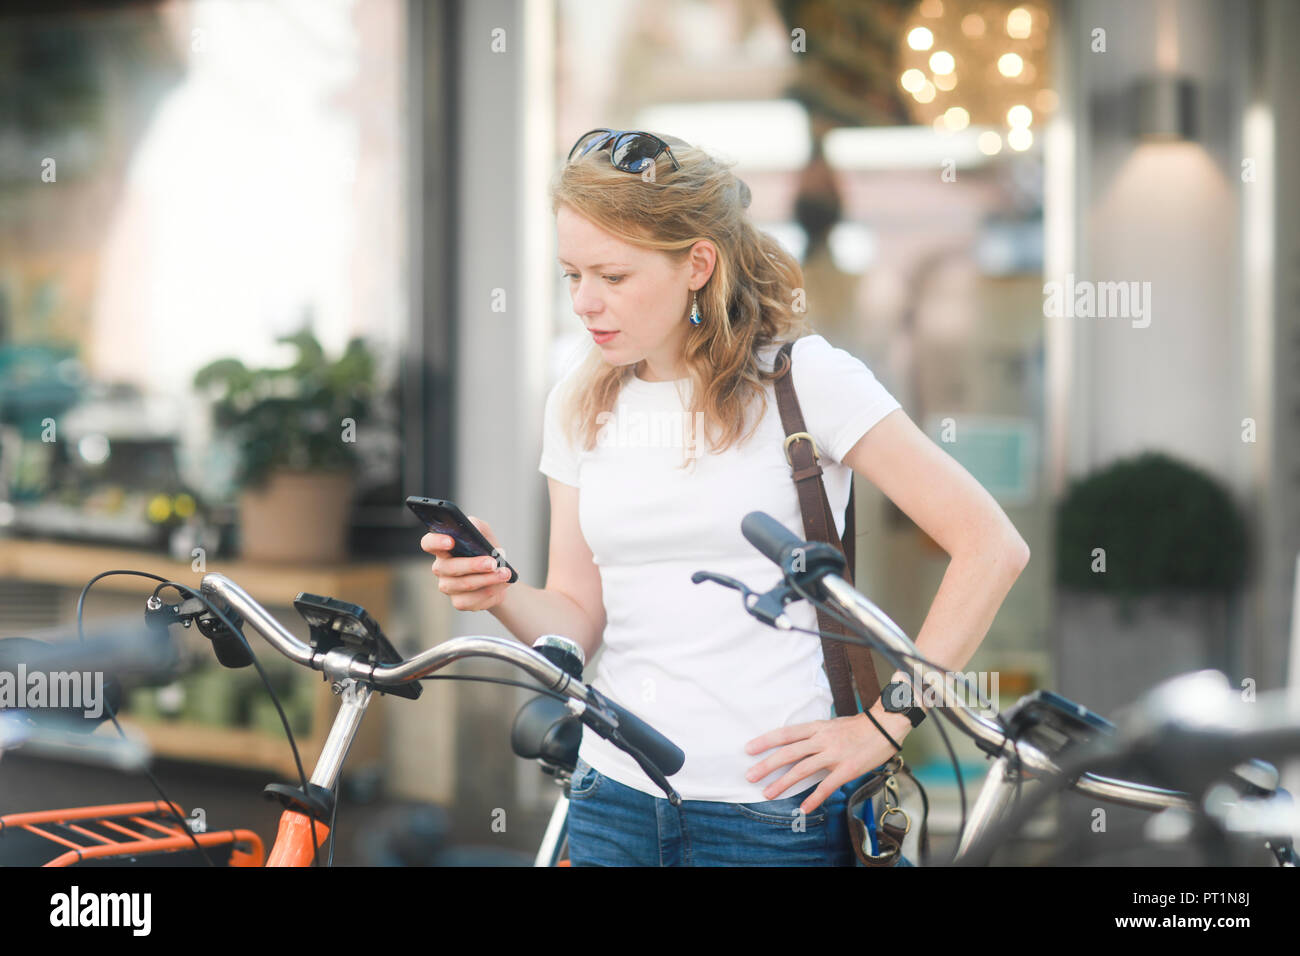 Germany, young woman with smartphone renting a city bike Stock Photo